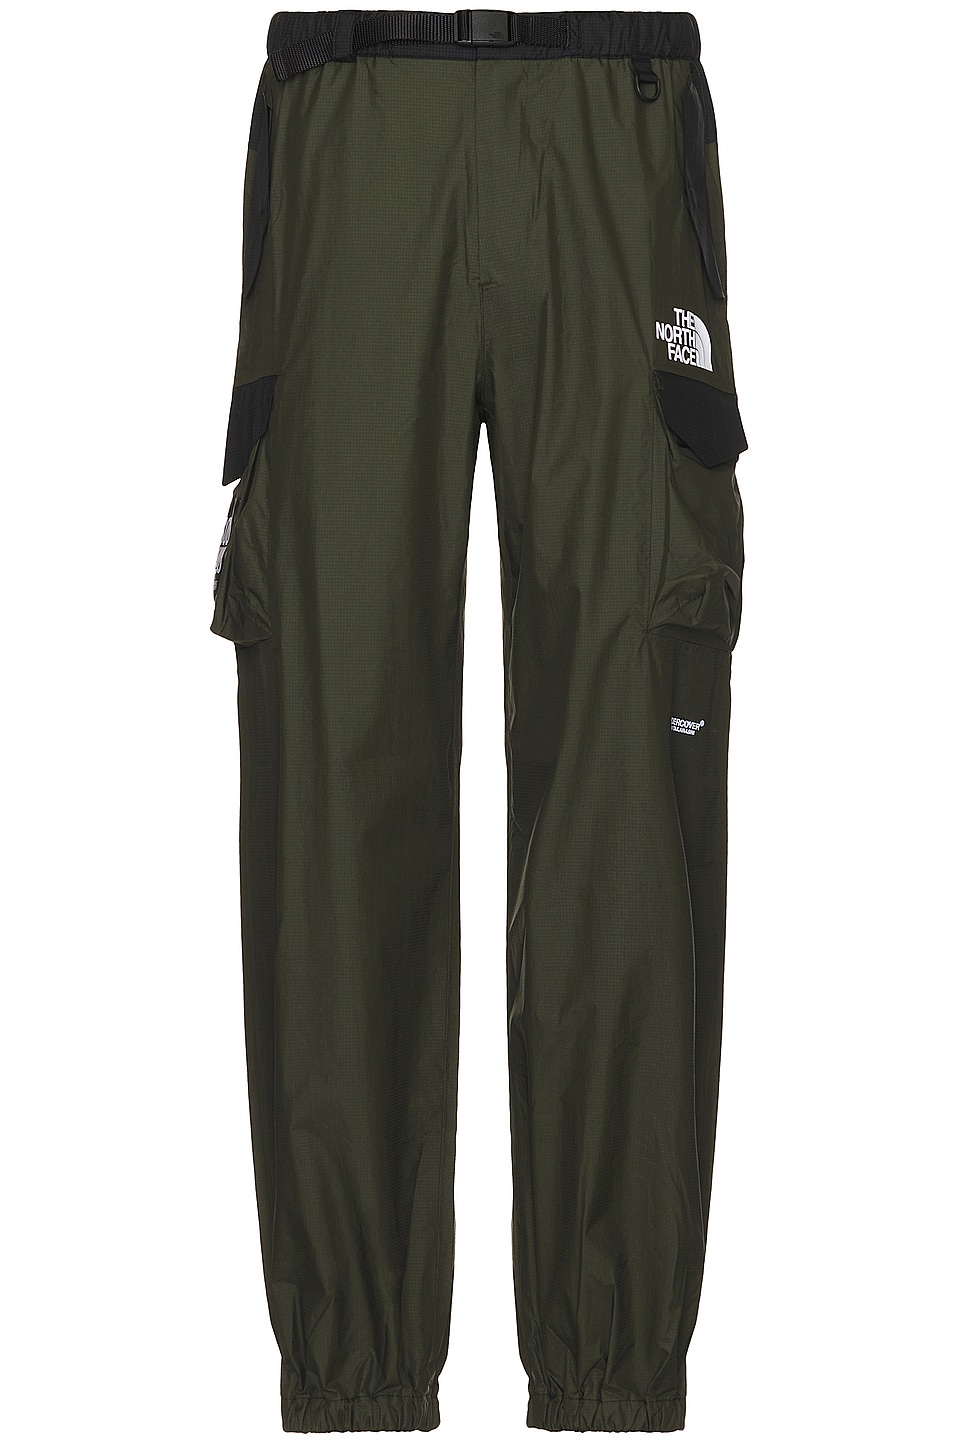 Image 1 of The North Face Soukuu Hike Belted Utility Shell Pant in Tnf Black & Forest Night